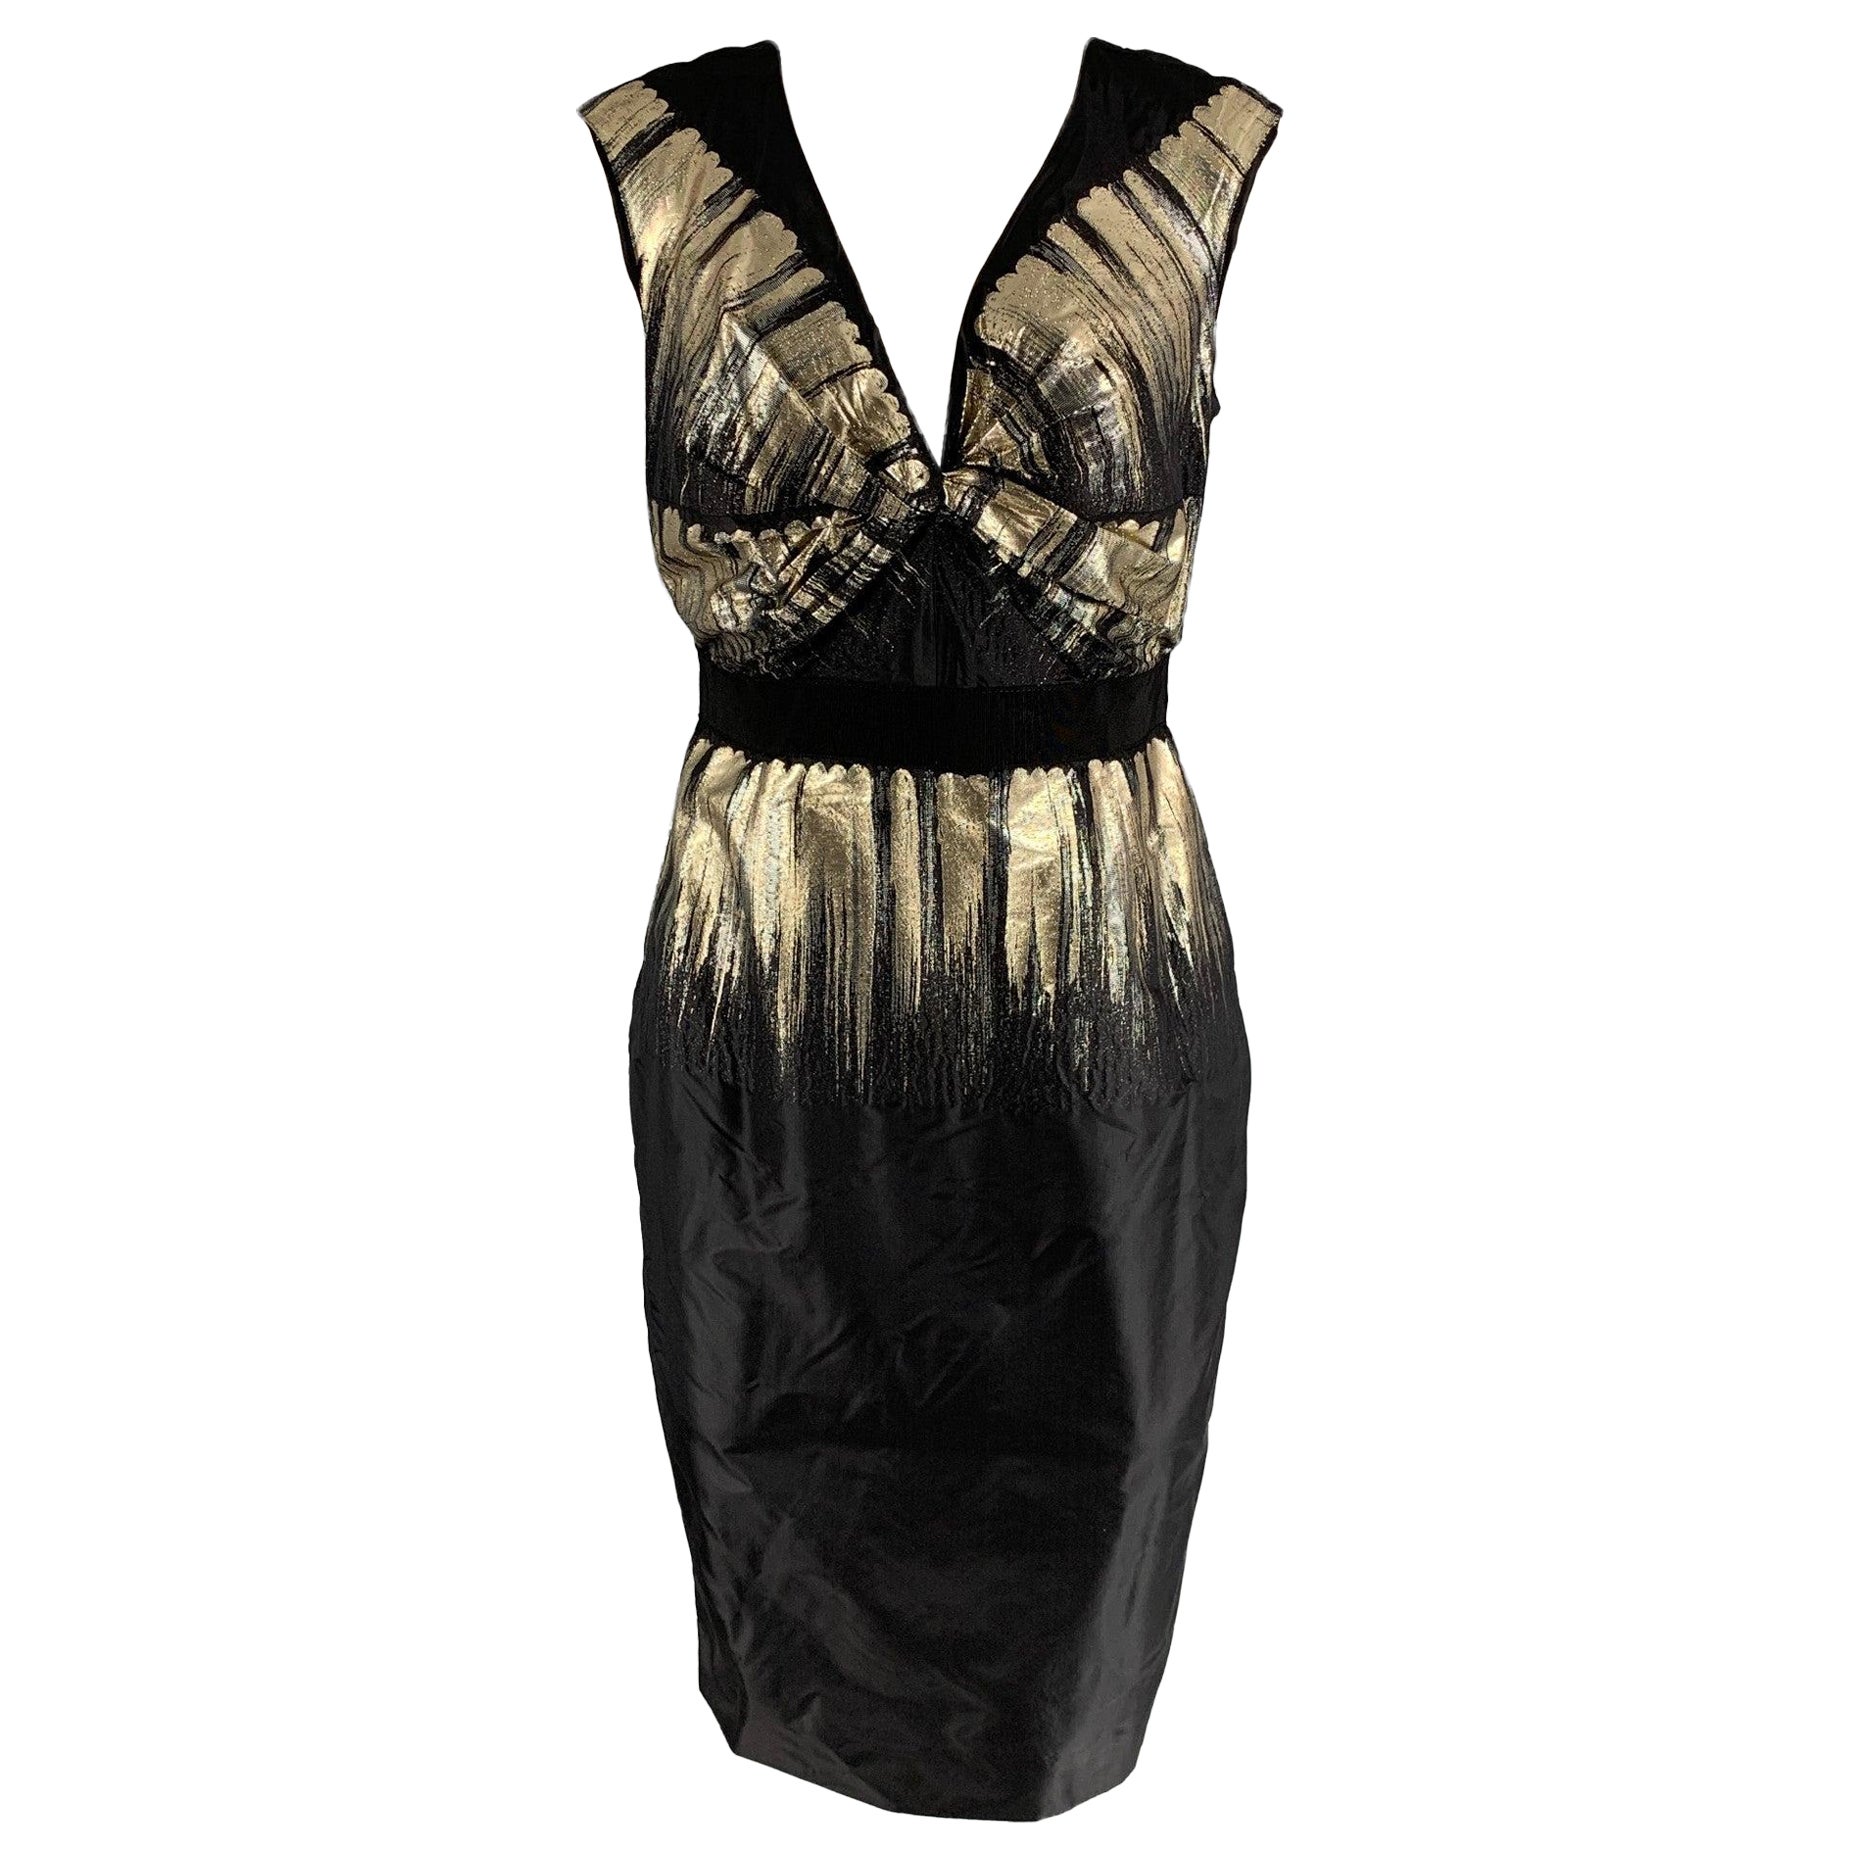 PORTS 1961 Size 4 Black, Gold & Silver Ruched Cocktail Dress For Sale